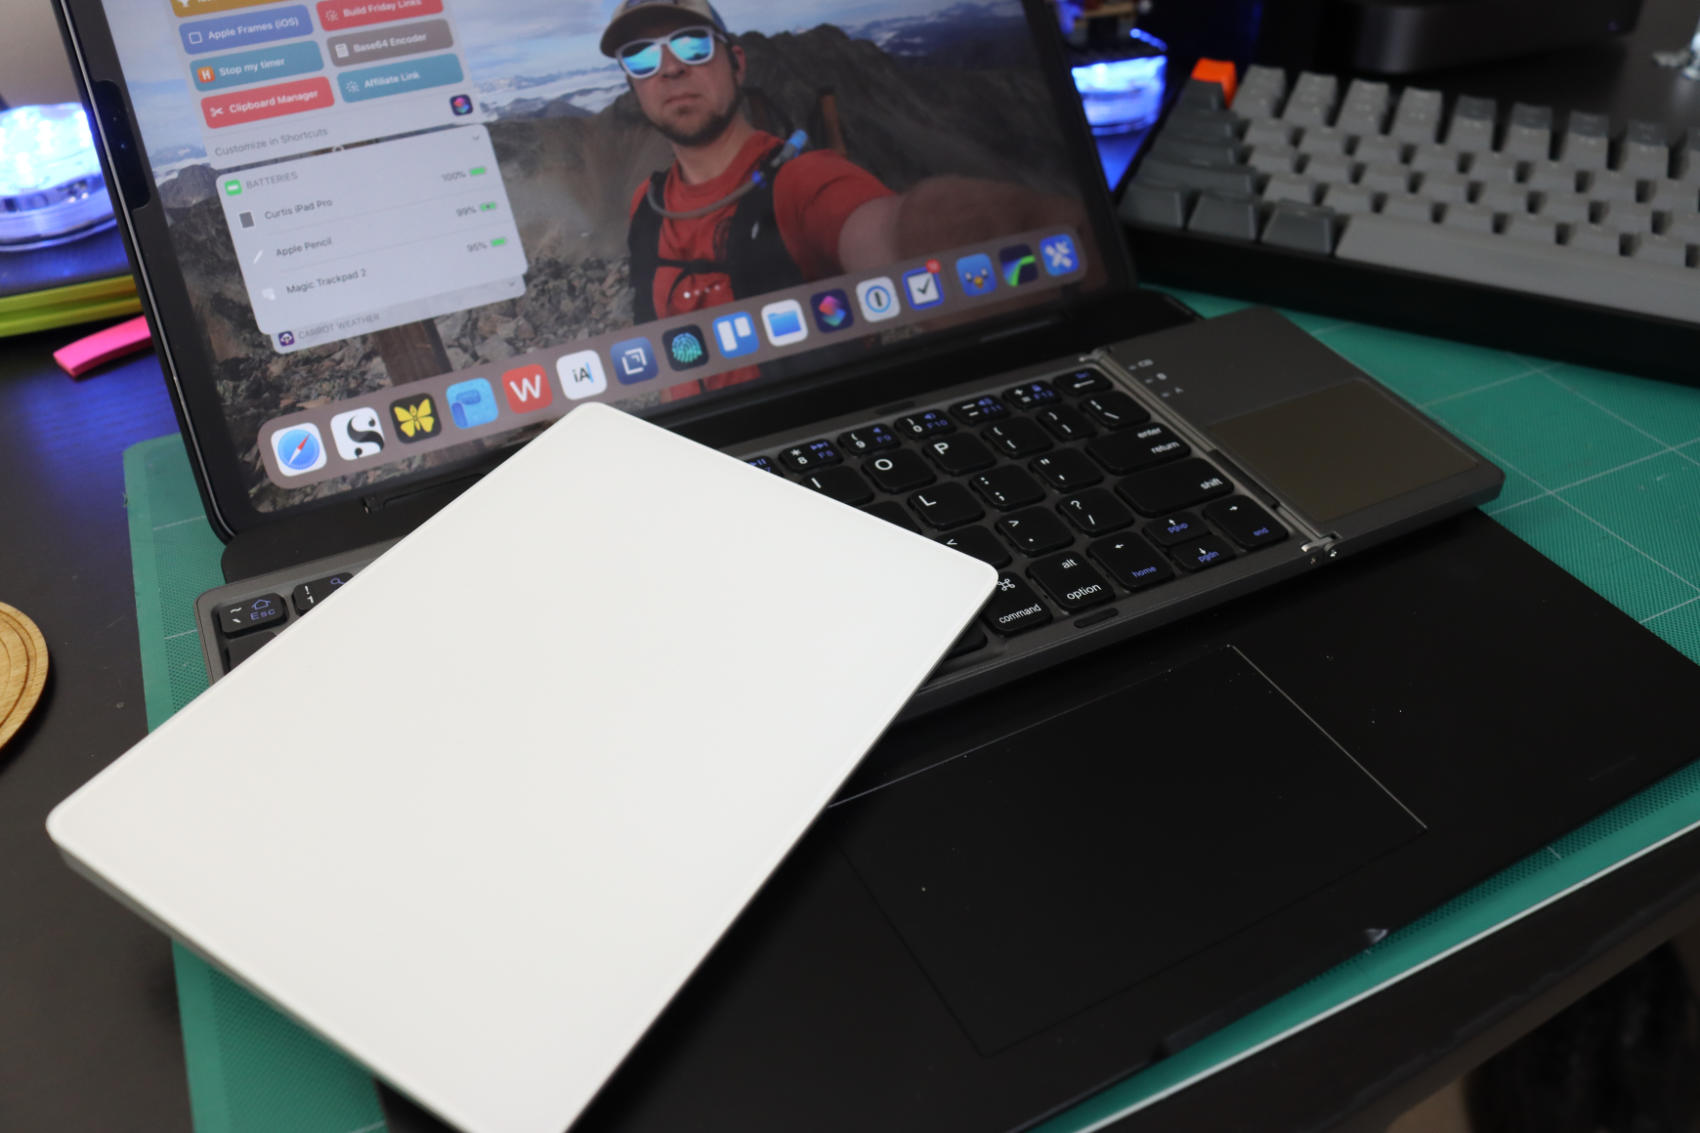 iPadOS 13.4 Trackpad Support and a Bug Fixed